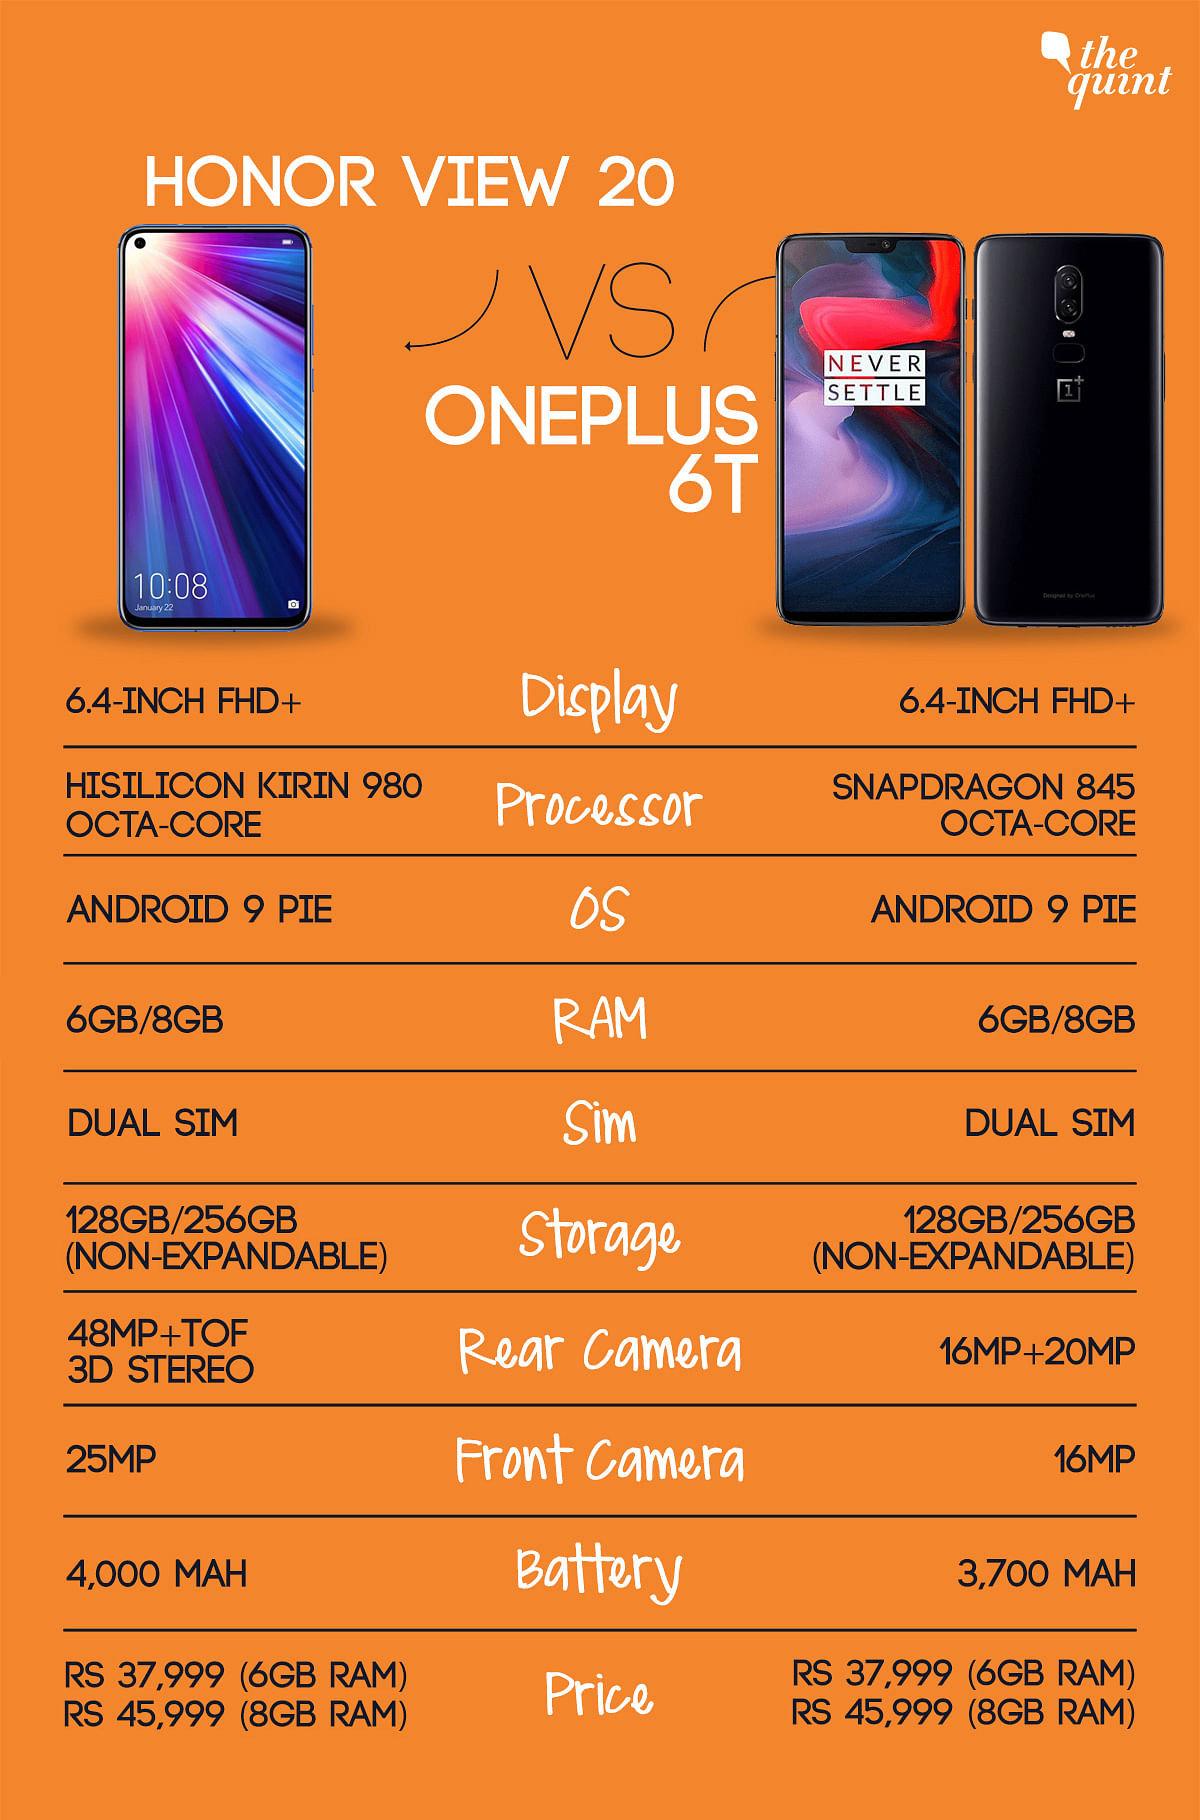 Honor View 20 versus OnePlus 6T: Which flagship killer should you buy? Here’s a quick comparison.